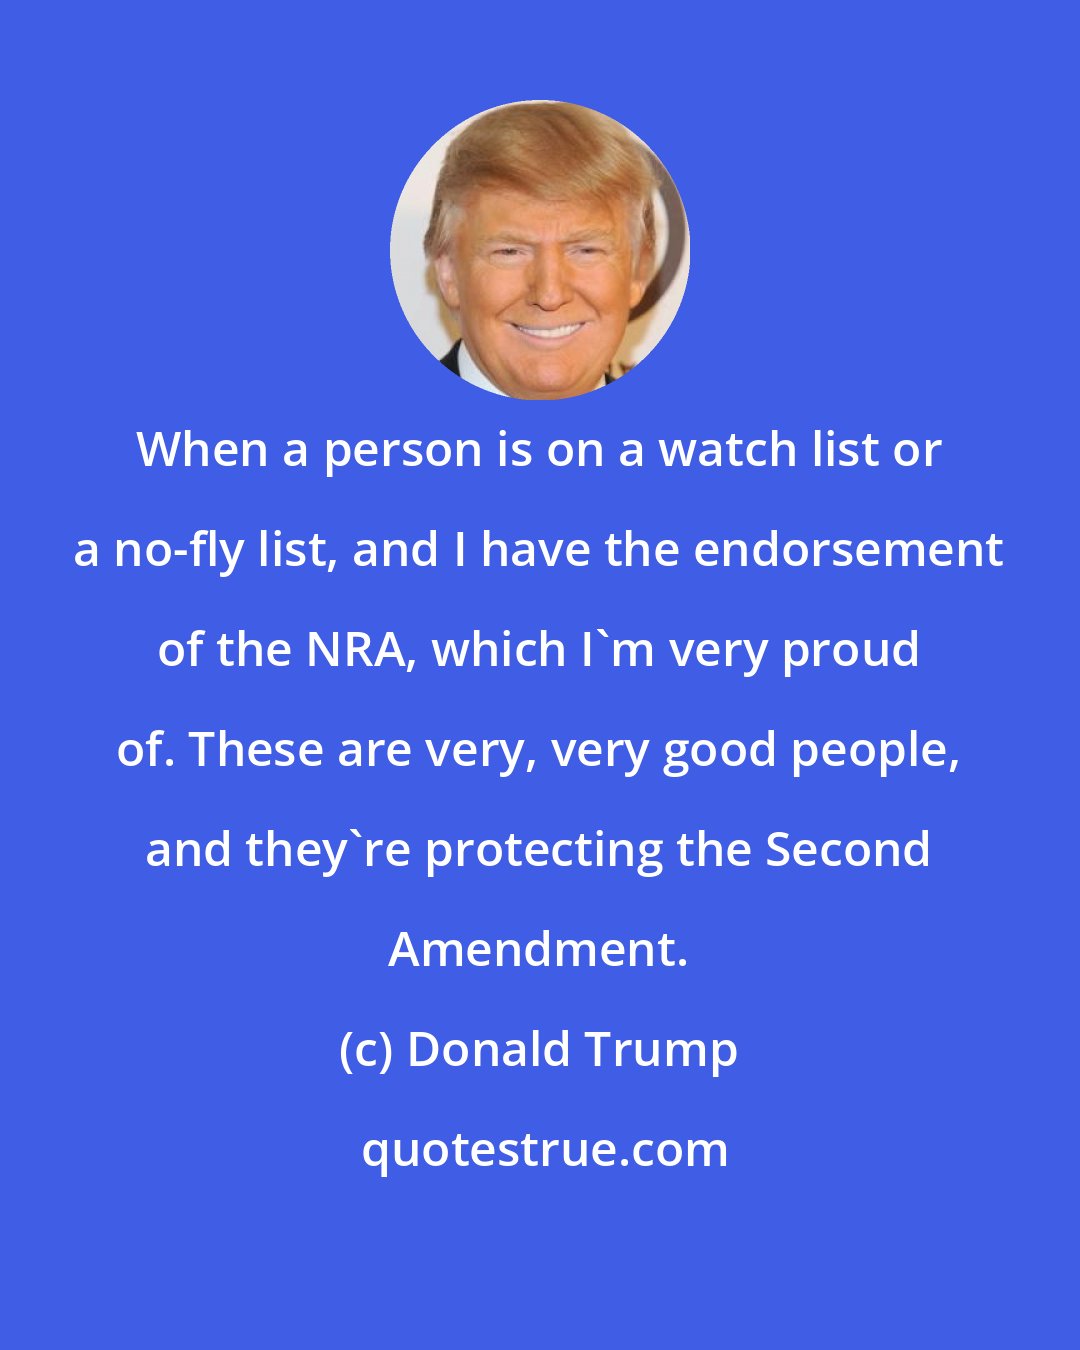 Donald Trump: When a person is on a watch list or a no-fly list, and I have the endorsement of the NRA, which I'm very proud of. These are very, very good people, and they're protecting the Second Amendment.